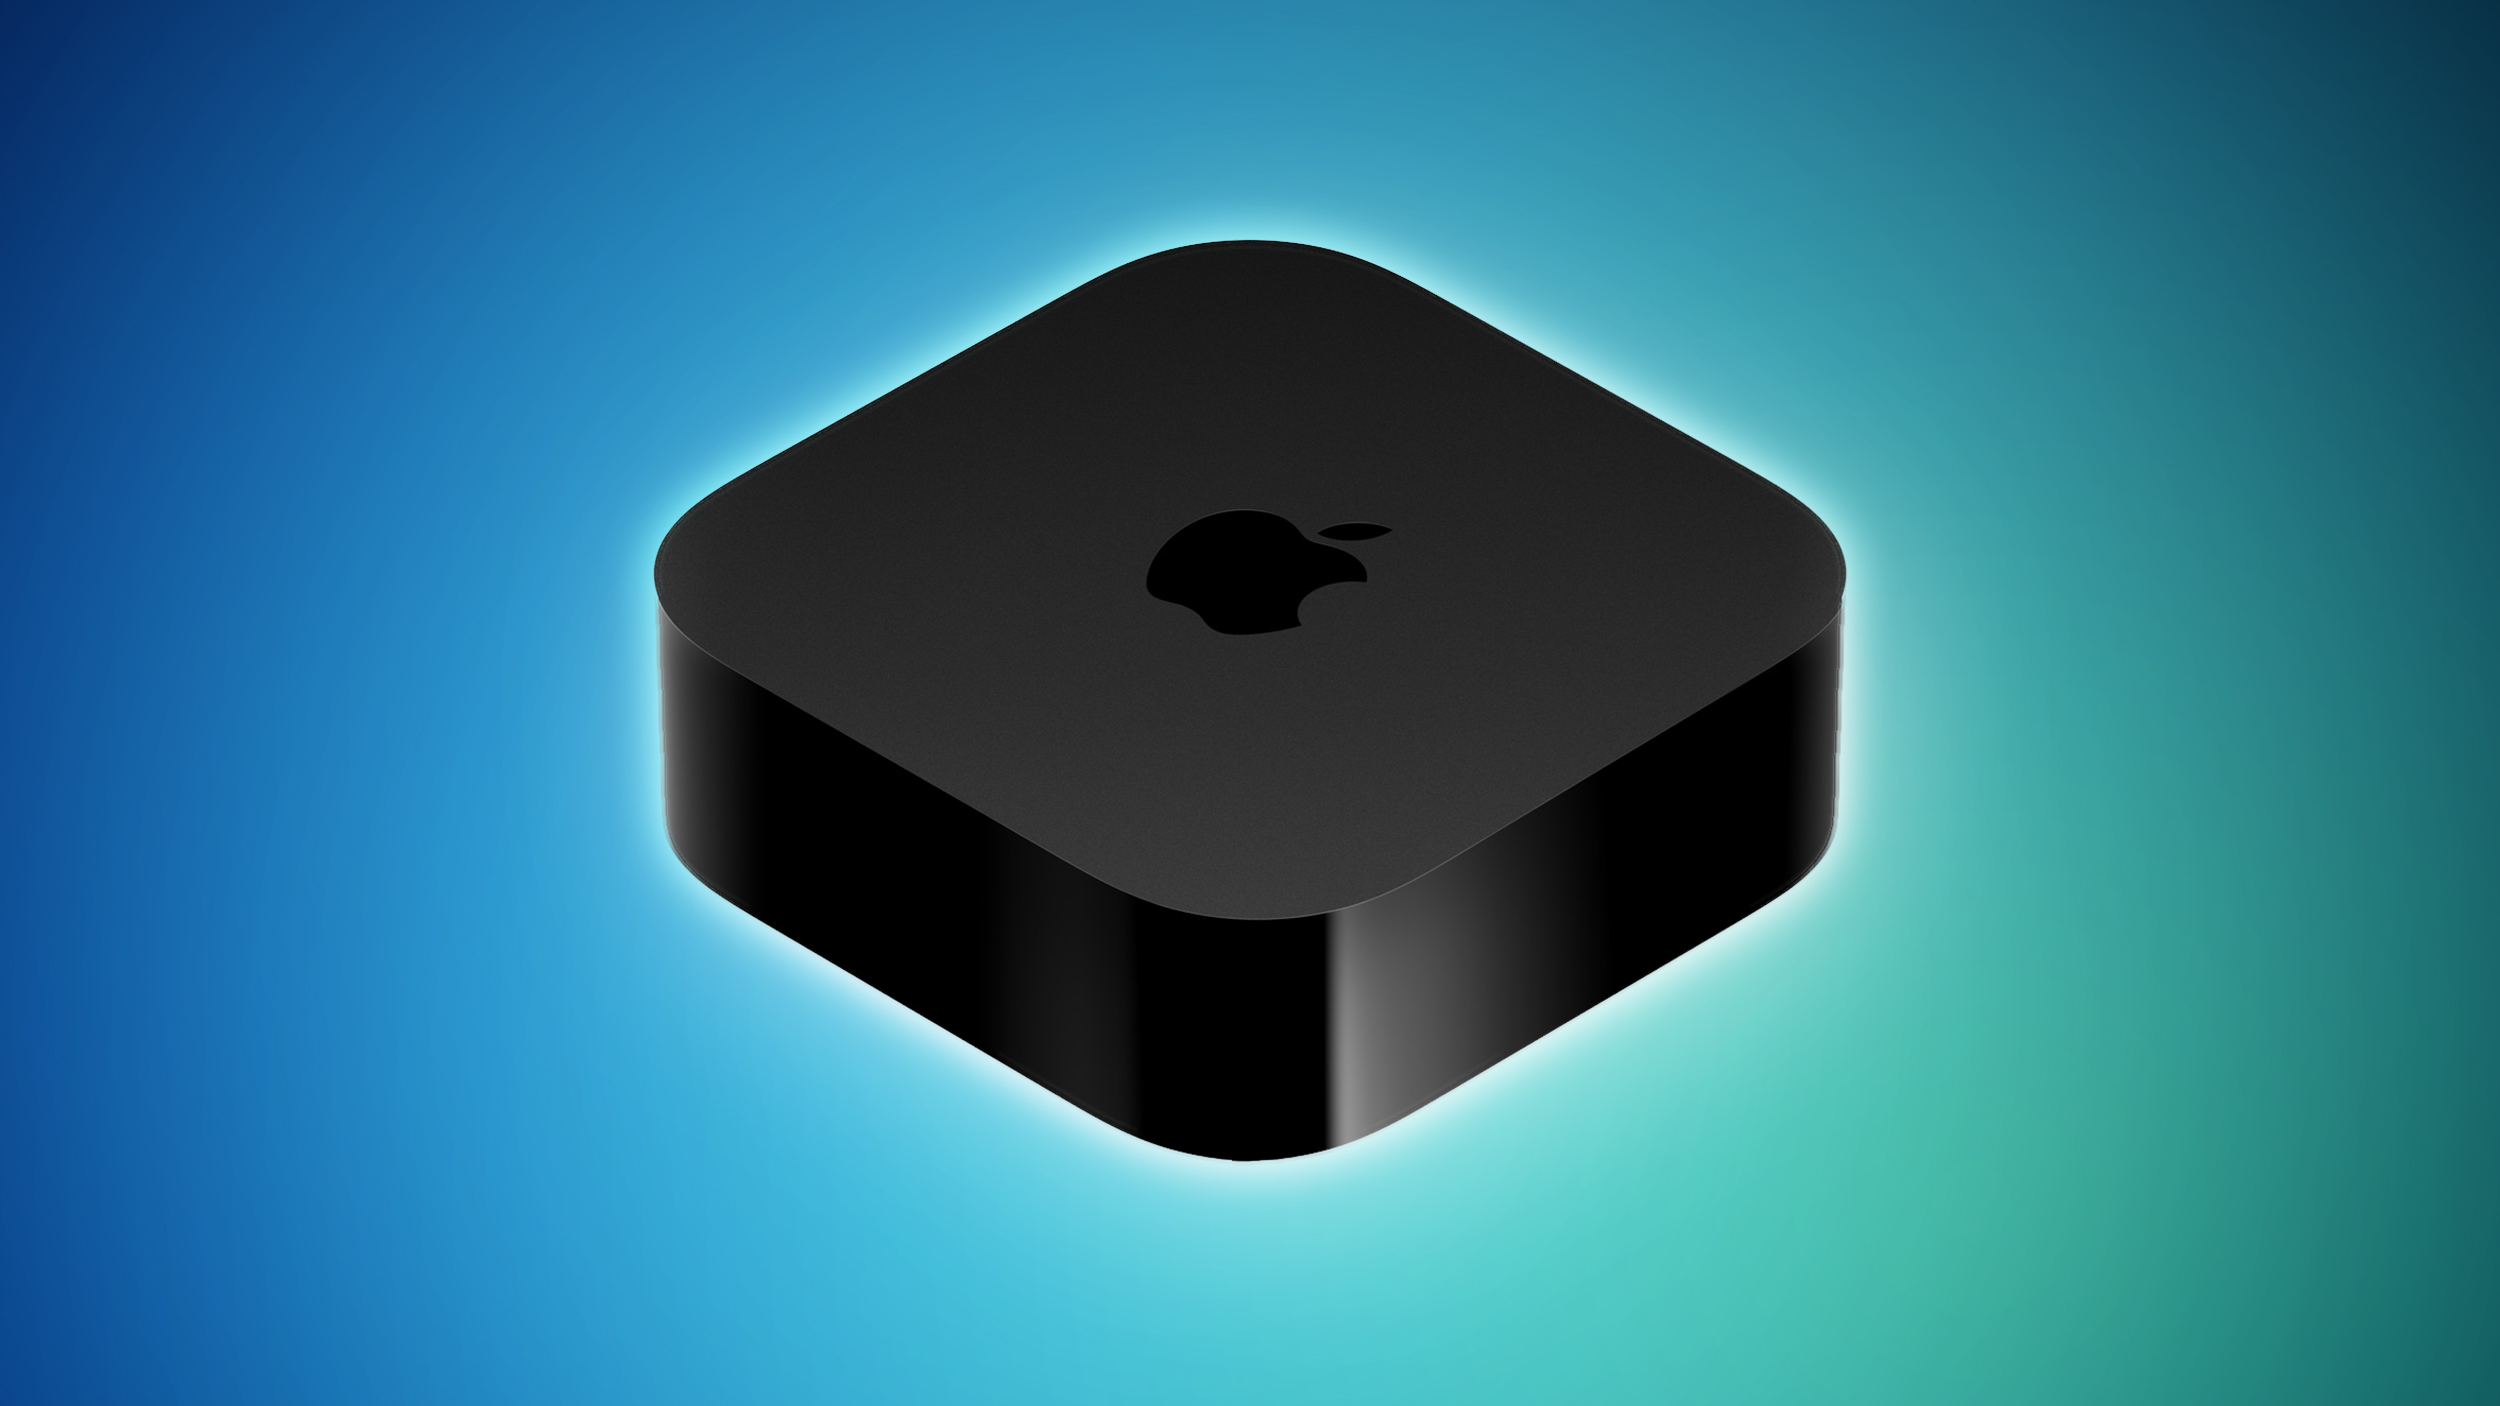 Deals: Launch Day Discounts Hit New Apple TV 4K Models on Amazon, Available From $124.99